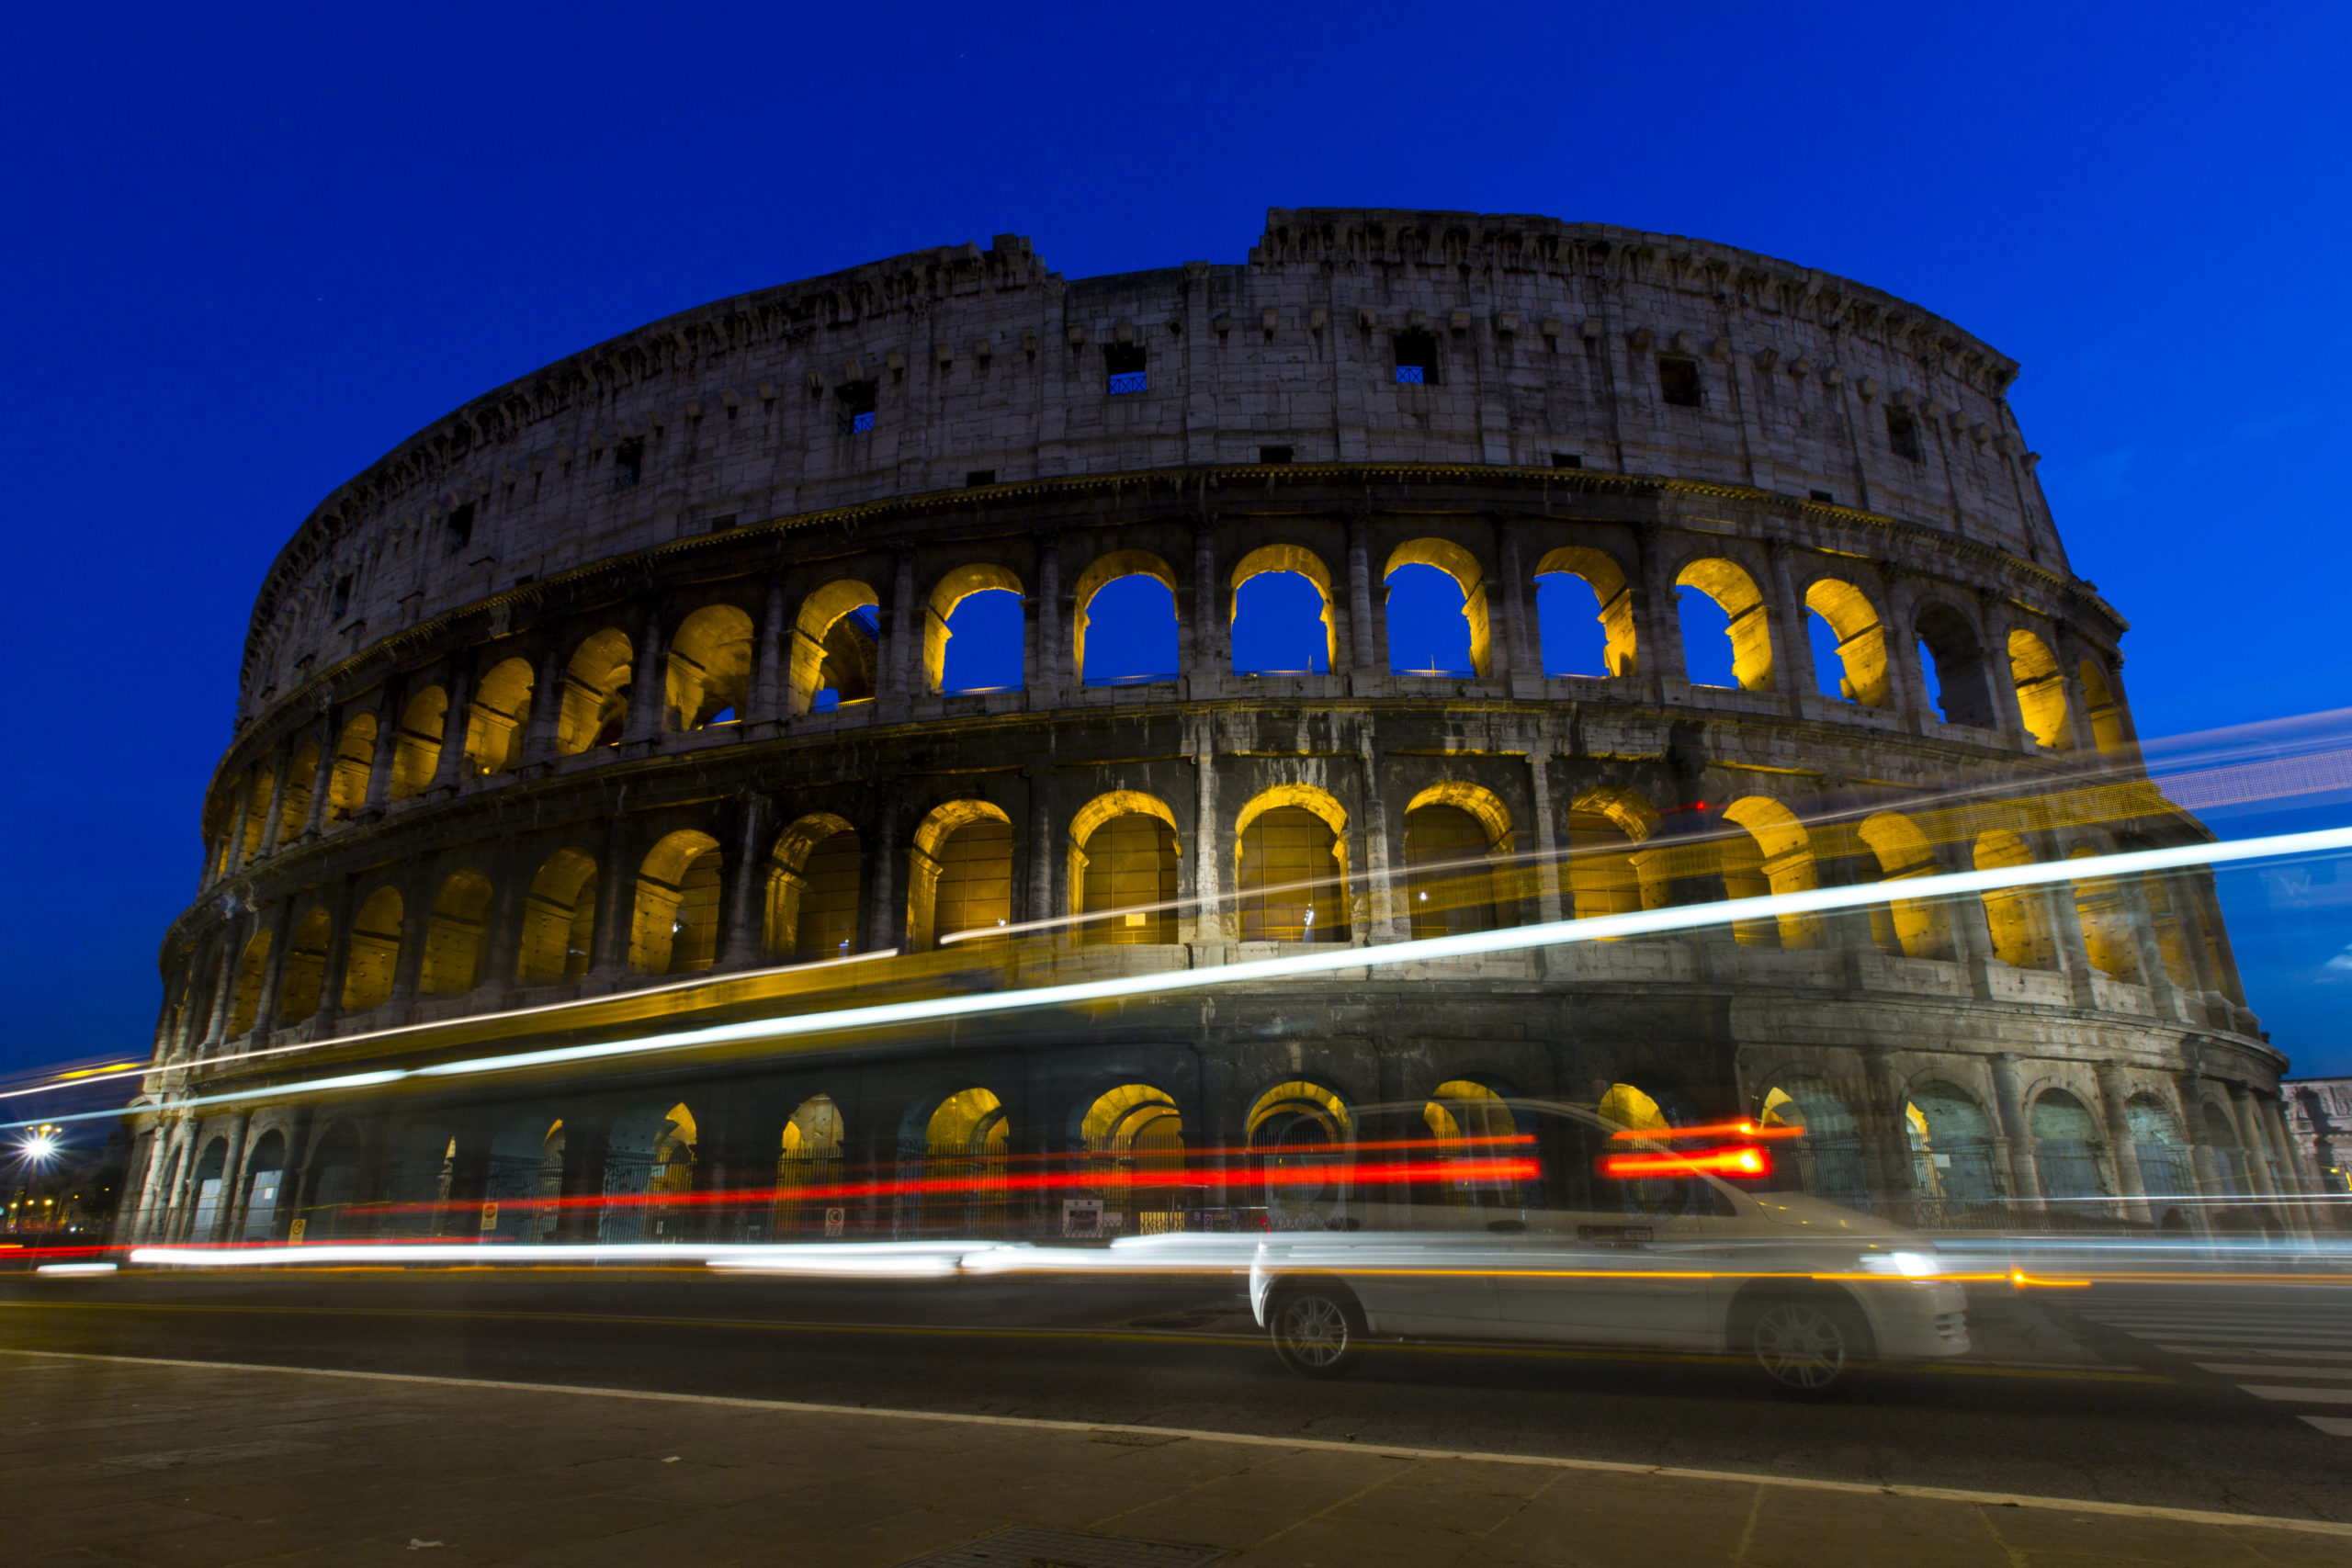 The Coliseum is seen in Rome, Italy, at dusk on the evening of February 26, 2013.